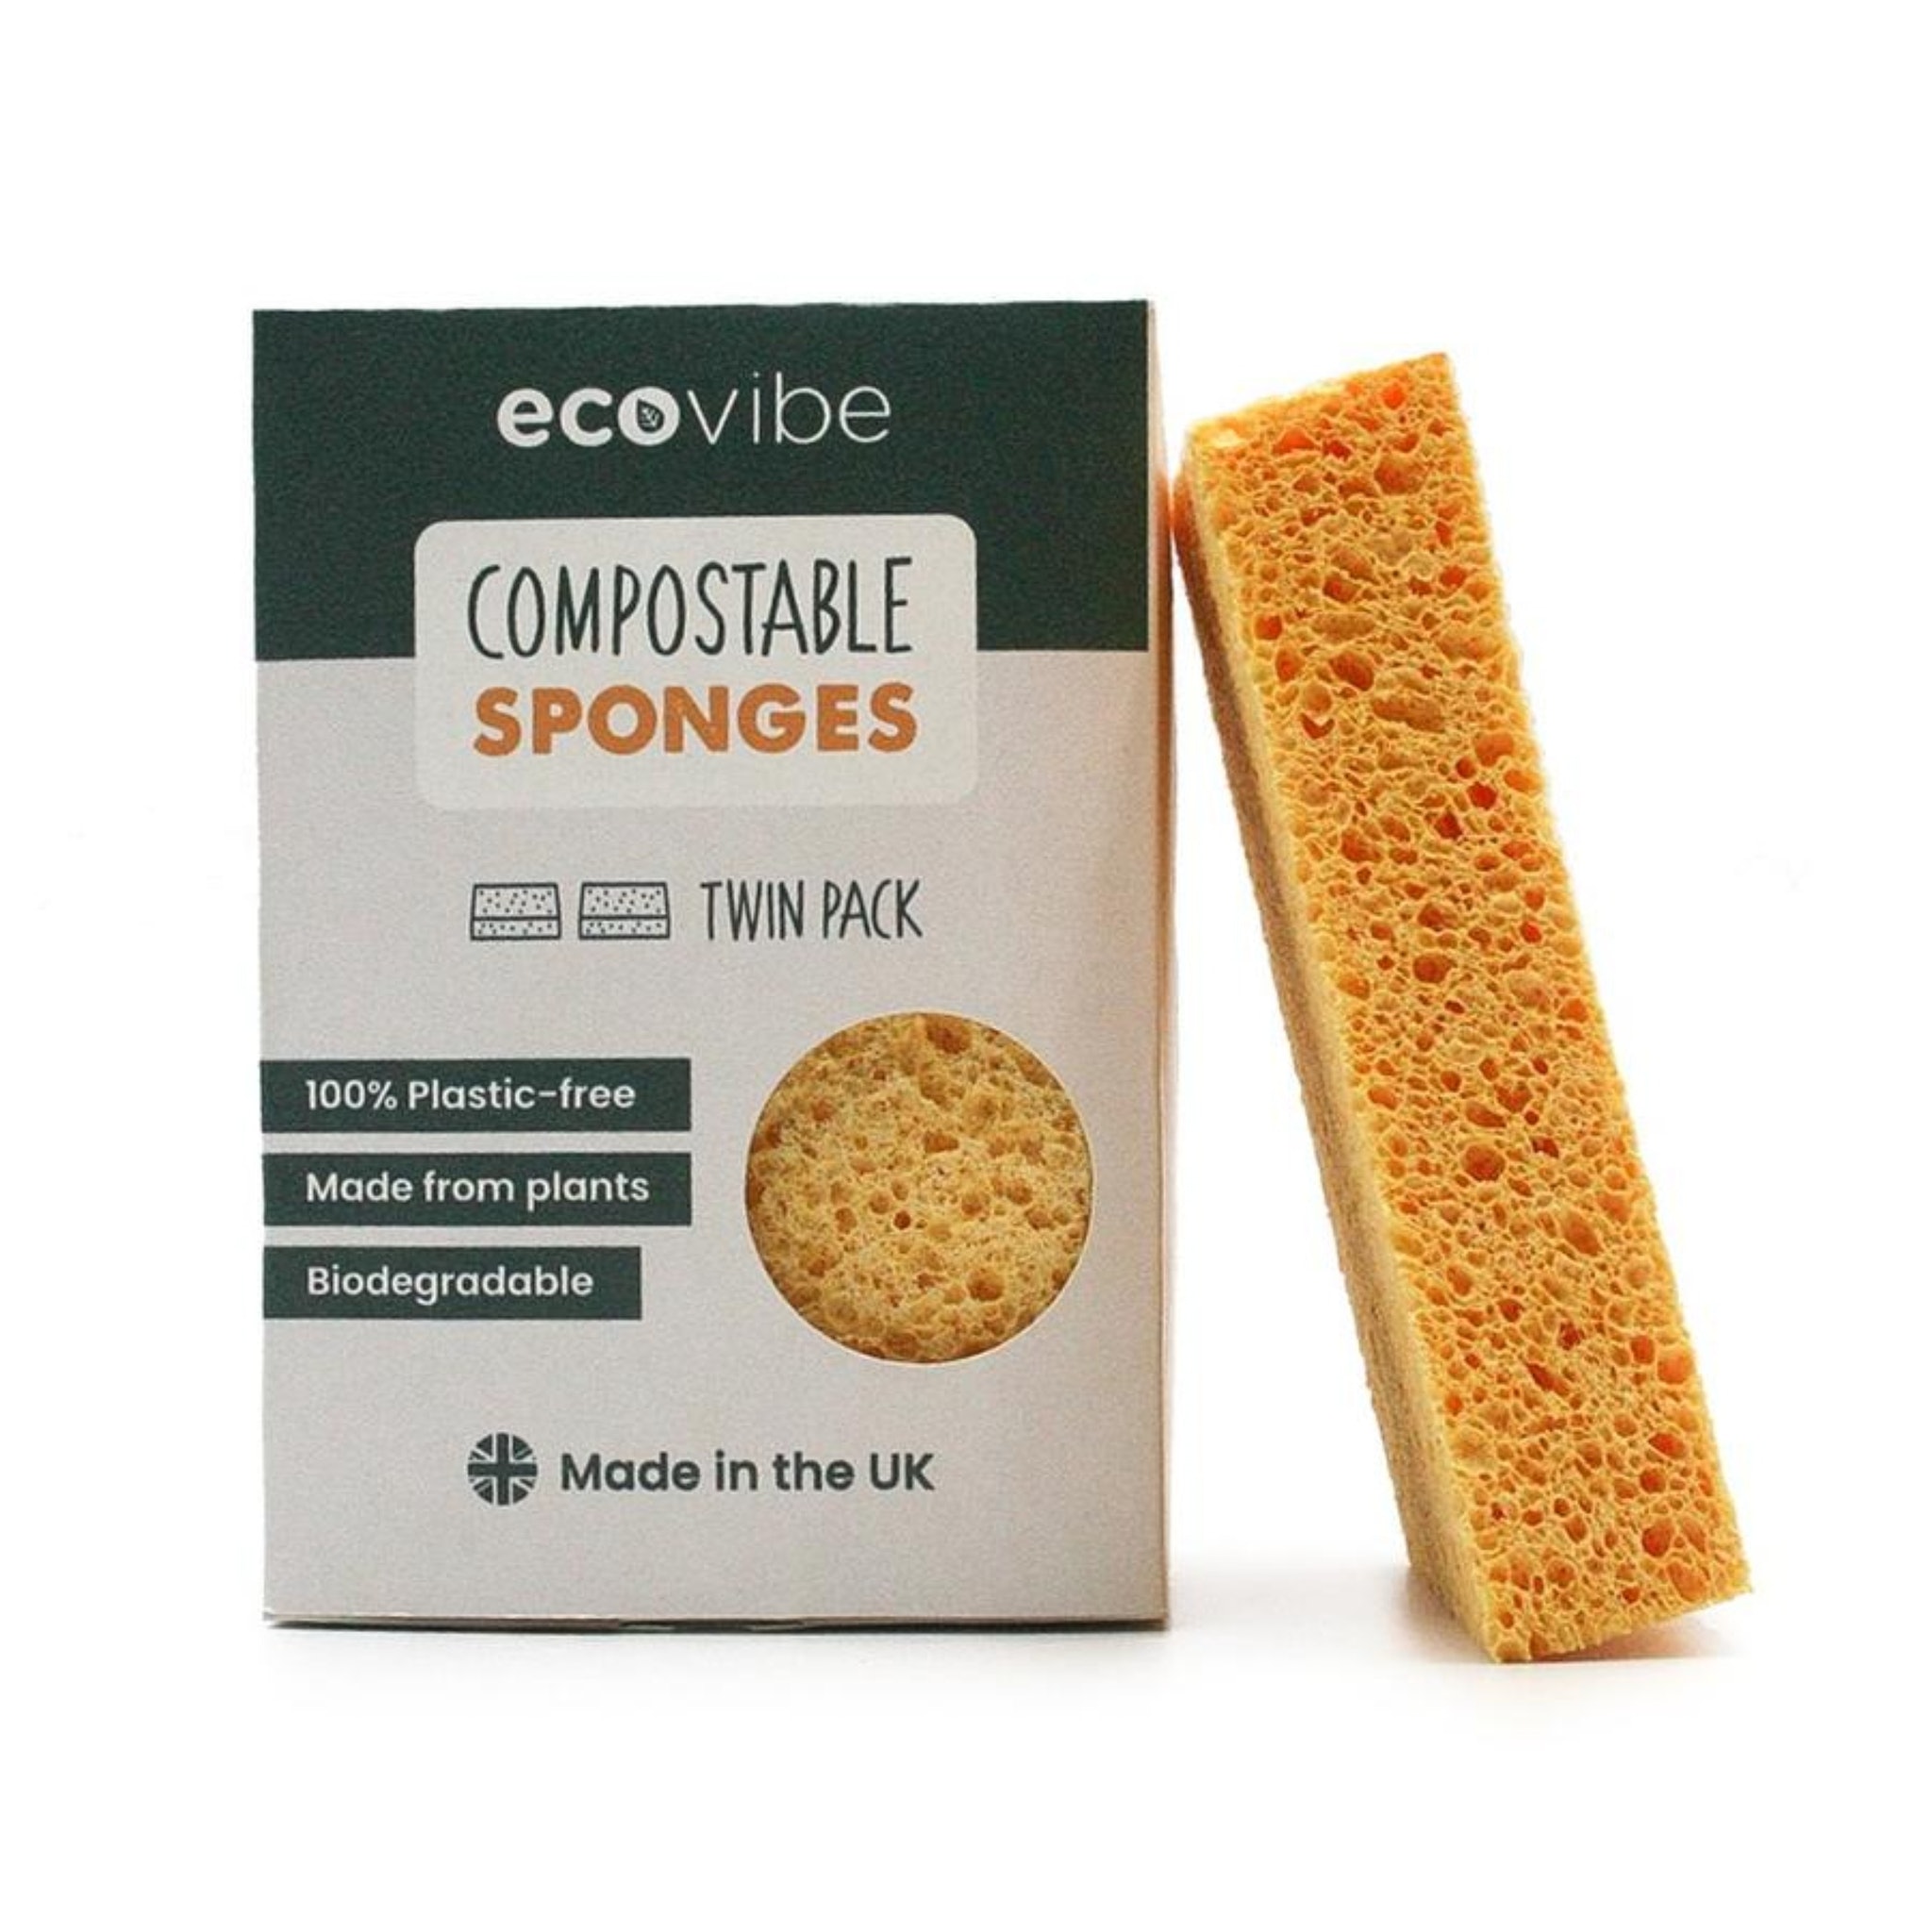 Compostable sponges two pack (Ecovibe)